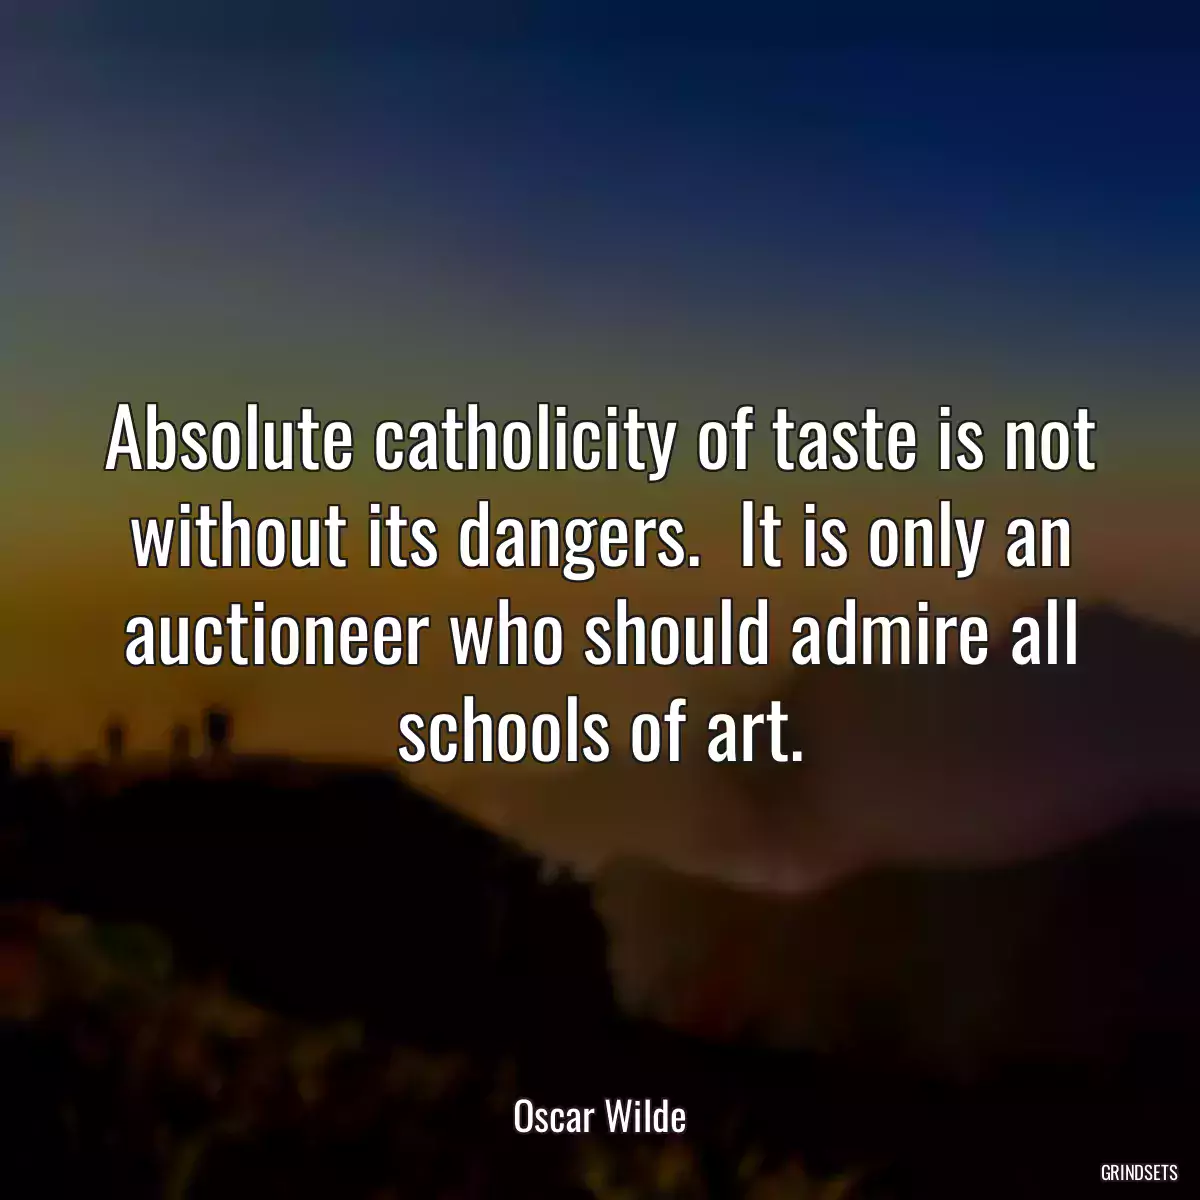 Absolute catholicity of taste is not without its dangers.  It is only an auctioneer who should admire all schools of art.